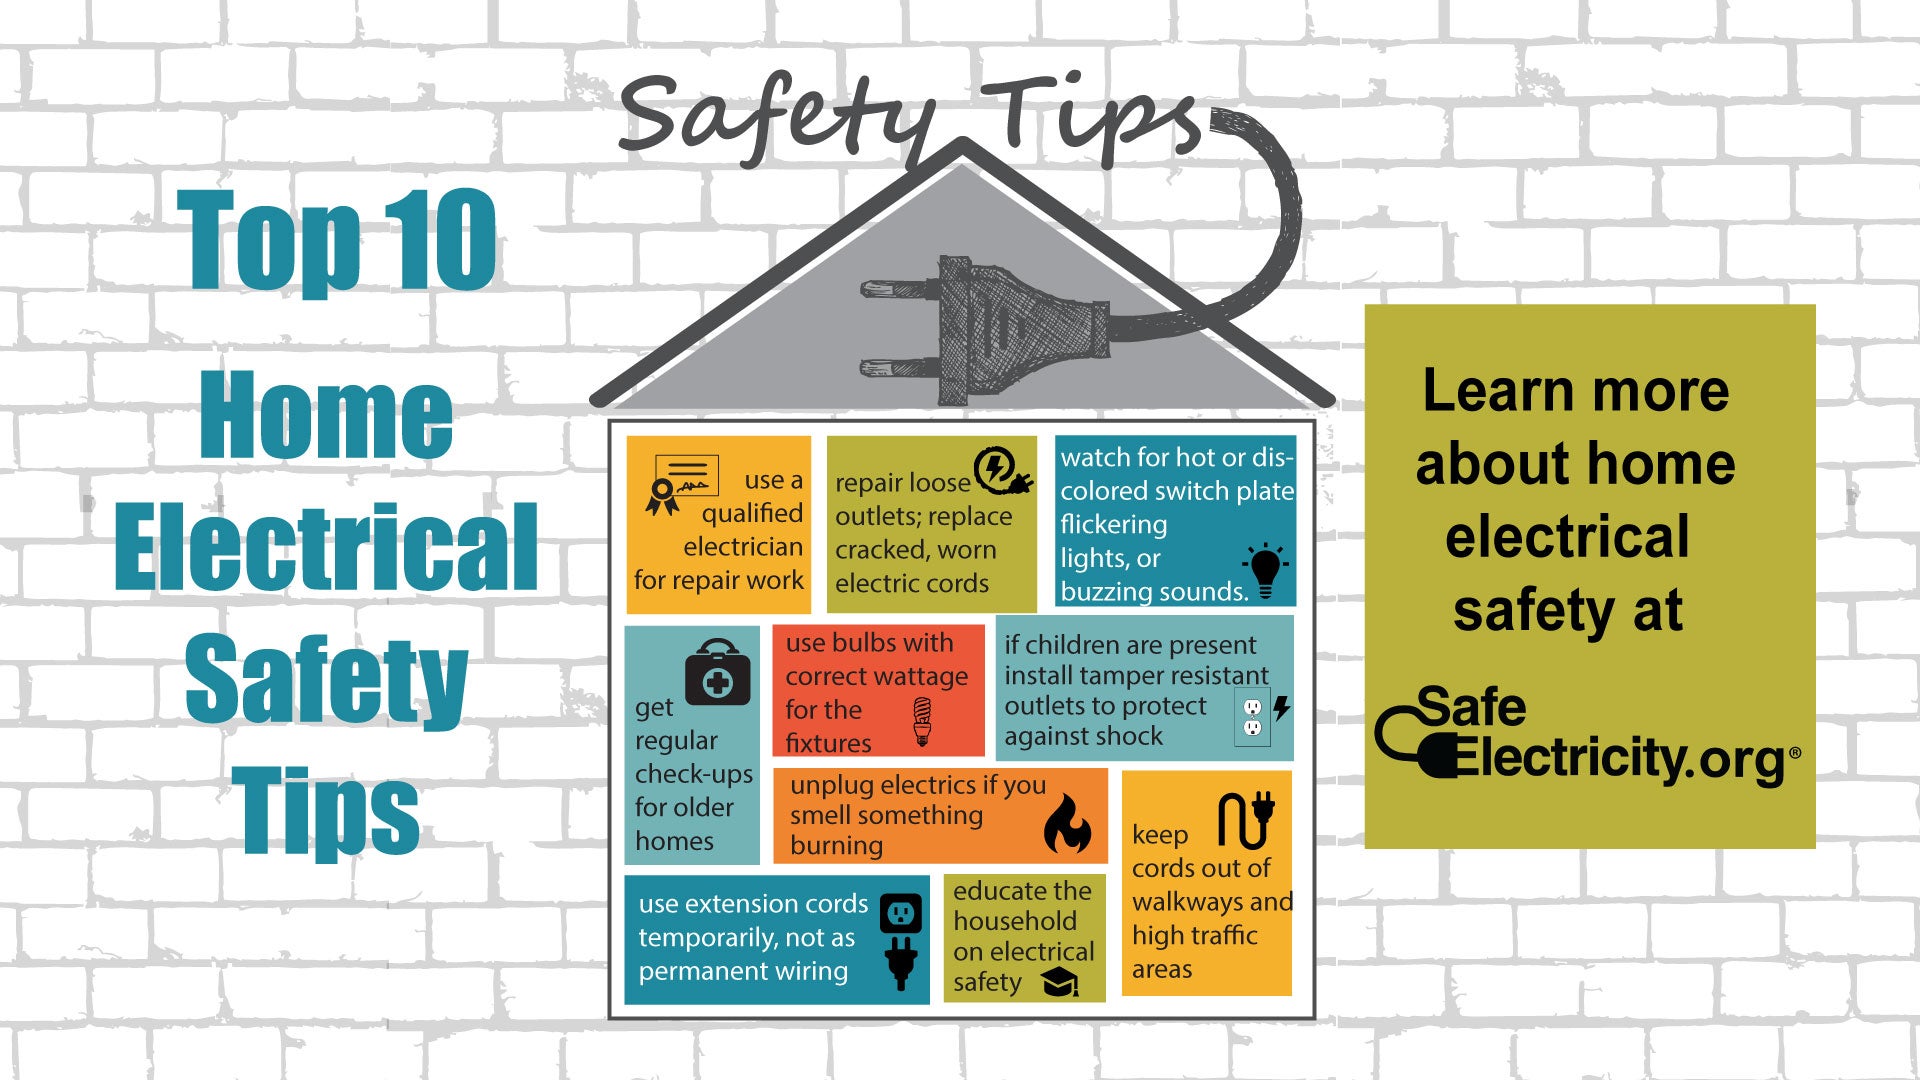 Home electrical safety tips 